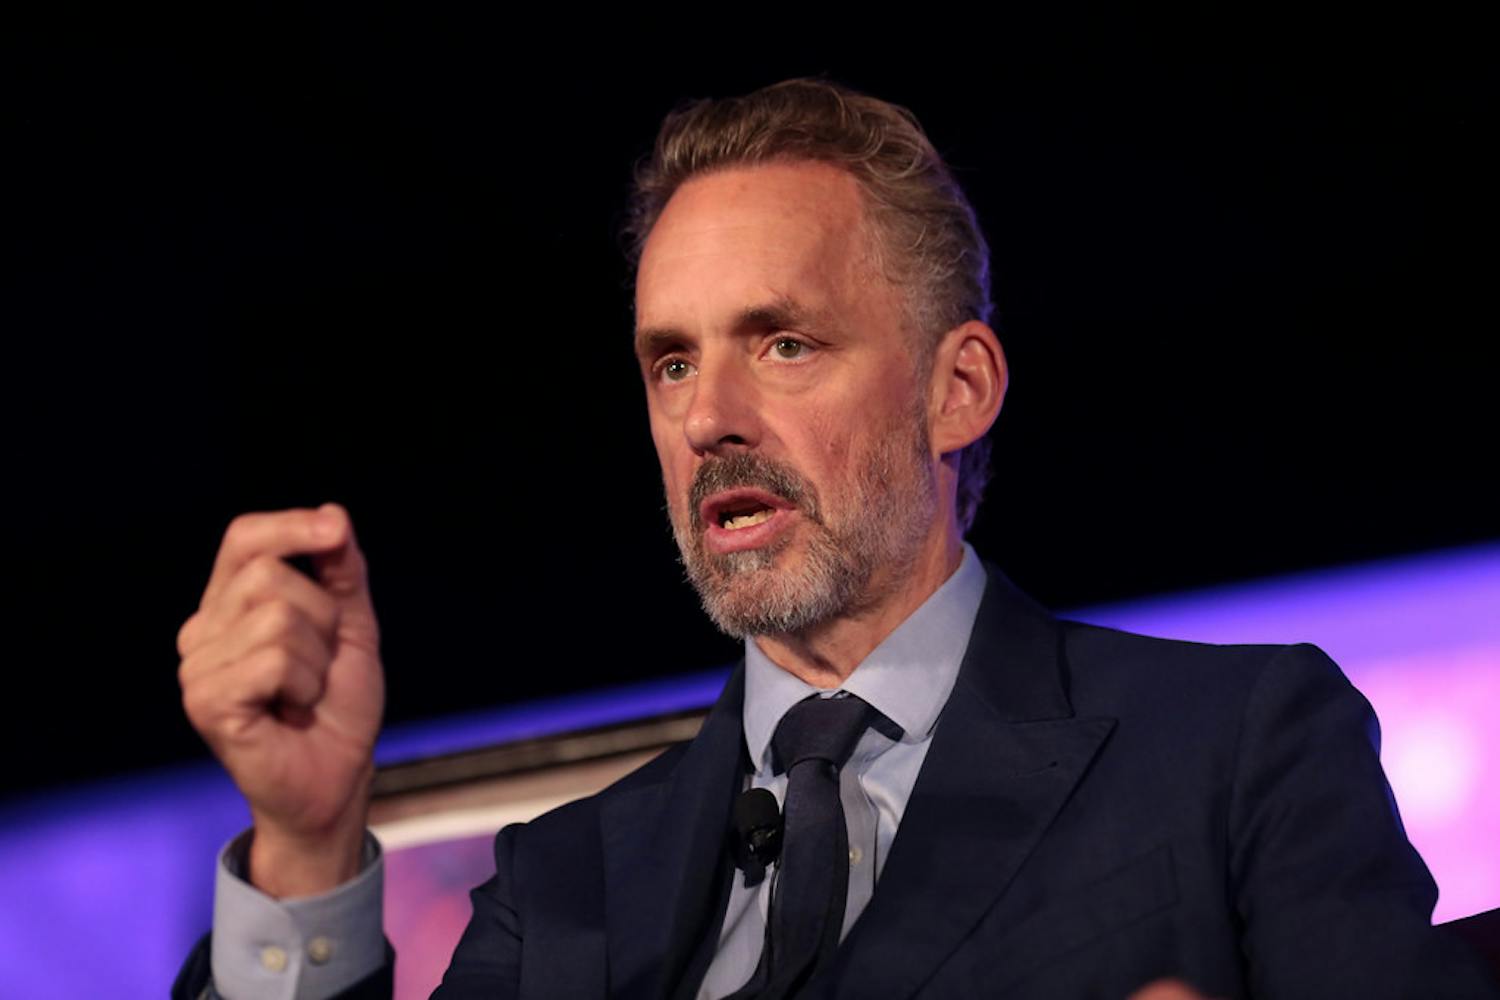 Jordan Peterson speaking with attendees at the 2018 Young Women's Leadership Summit hosted by Turning Point USA at the Hyatt Regency DFW Hotel in Dallas, Texas.